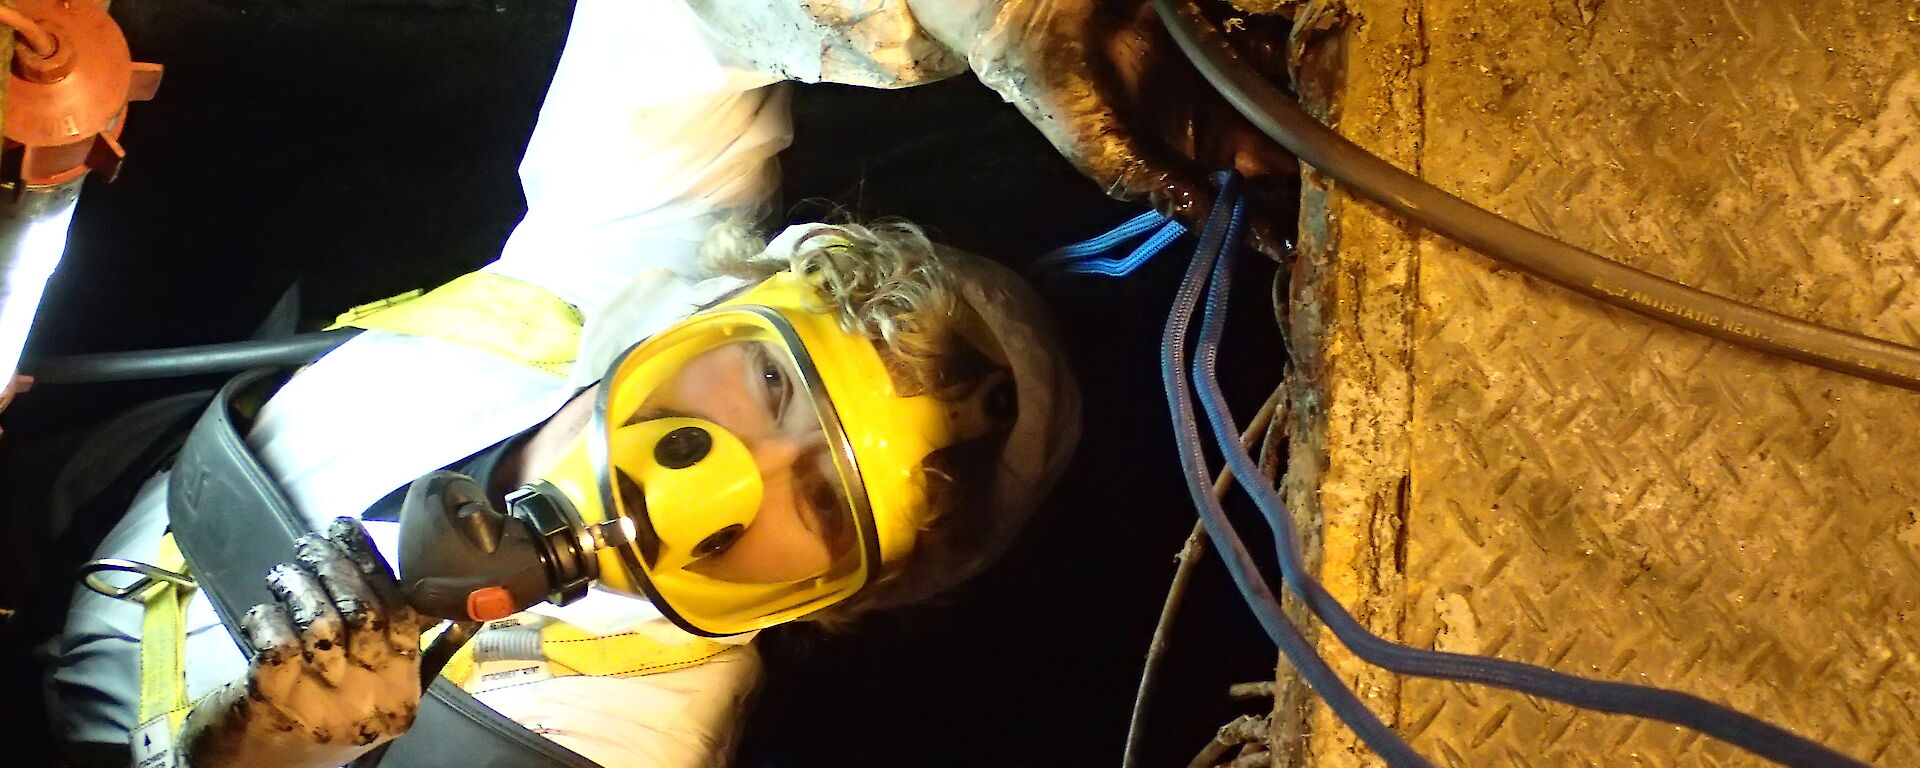 A plumber works in a confined space with a protective mask and oxygen for breathing